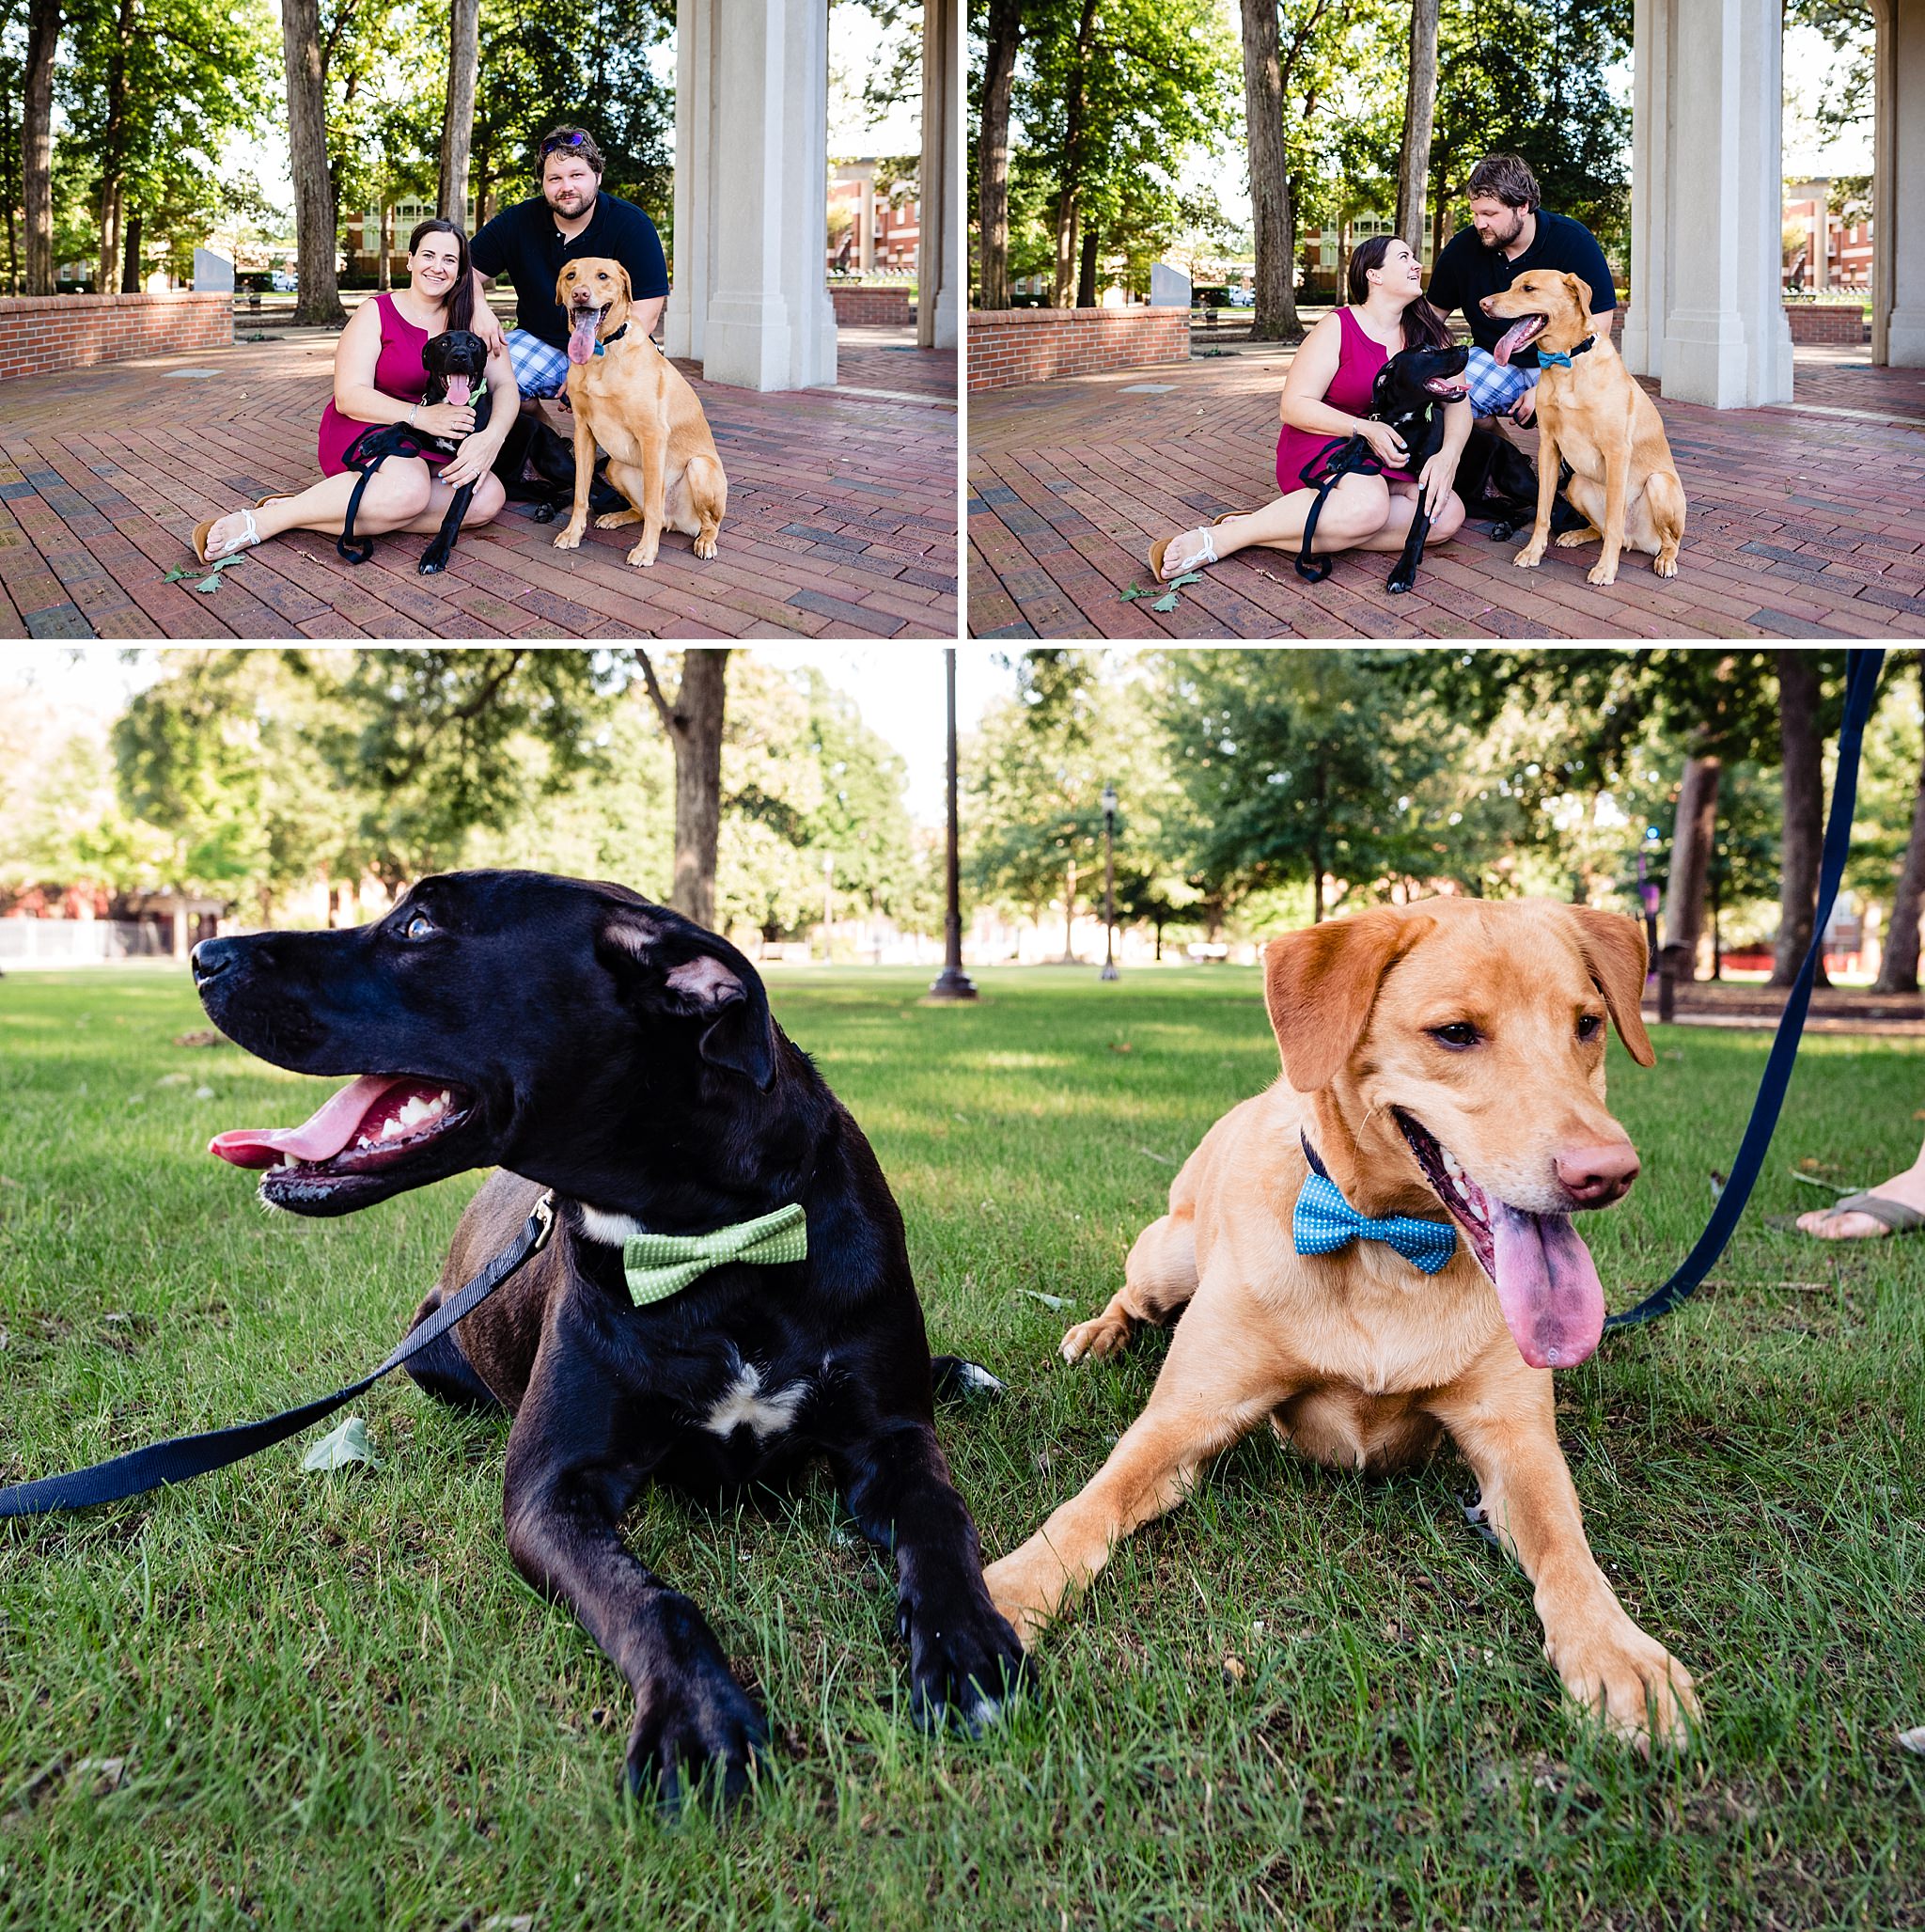 Fun engagement photos with dogs